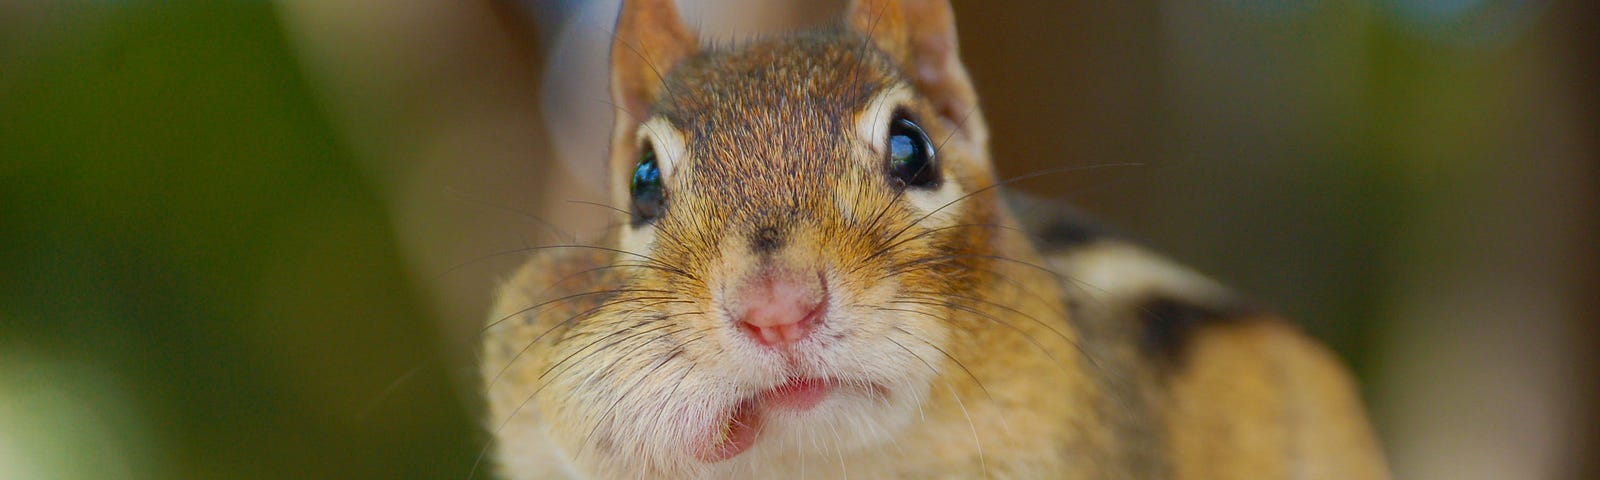 Chipmunk with food in mouth